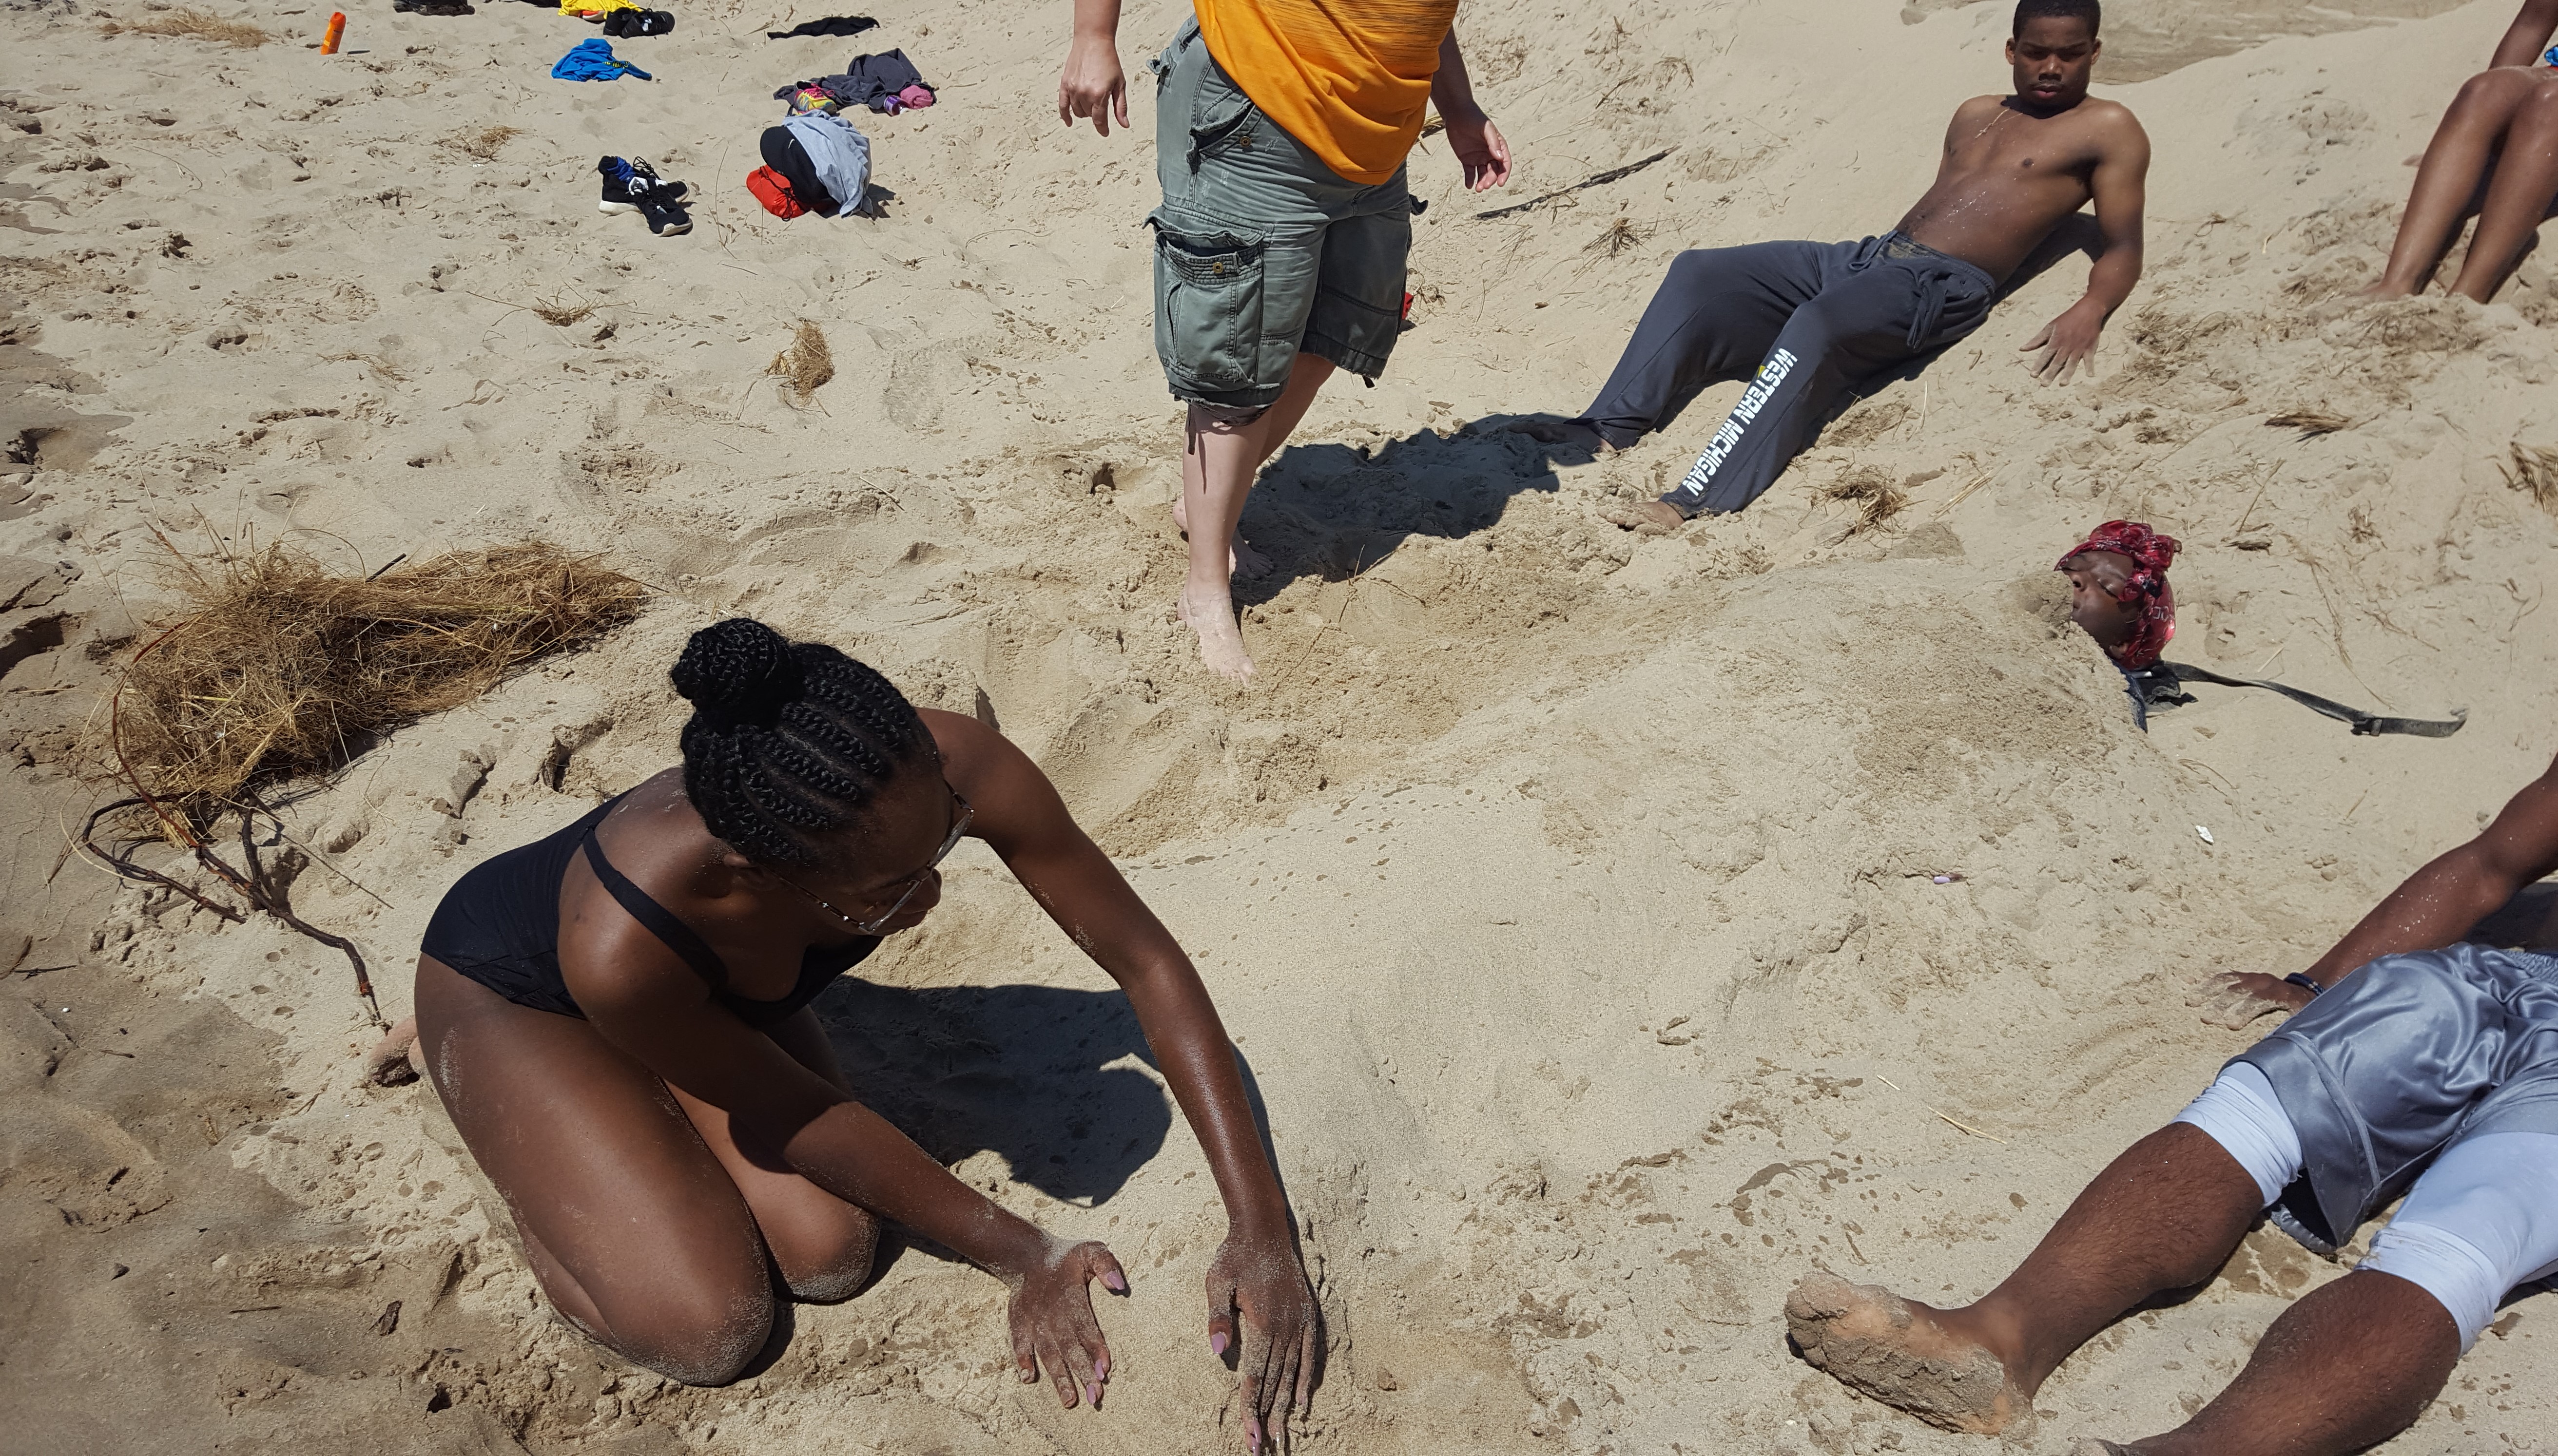 Asia Jones buries her friends in the sand along Lake Michigan.